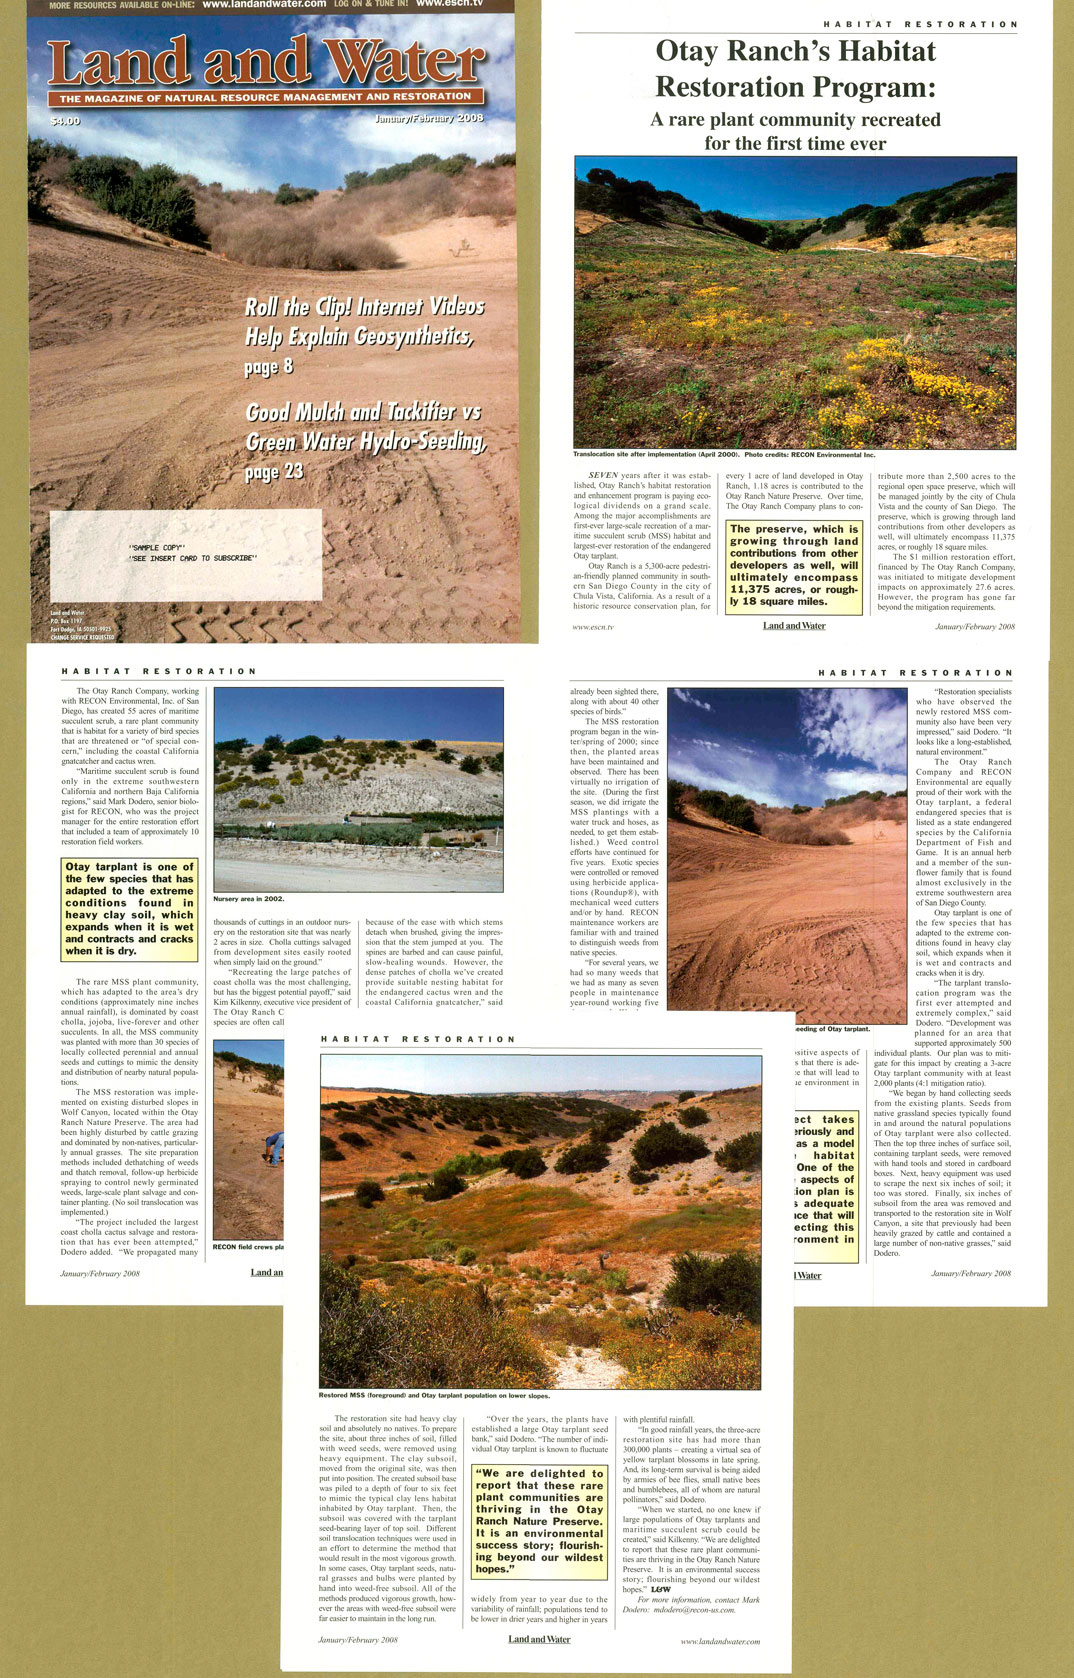 Land and Water Magazine - Otay Ranch article